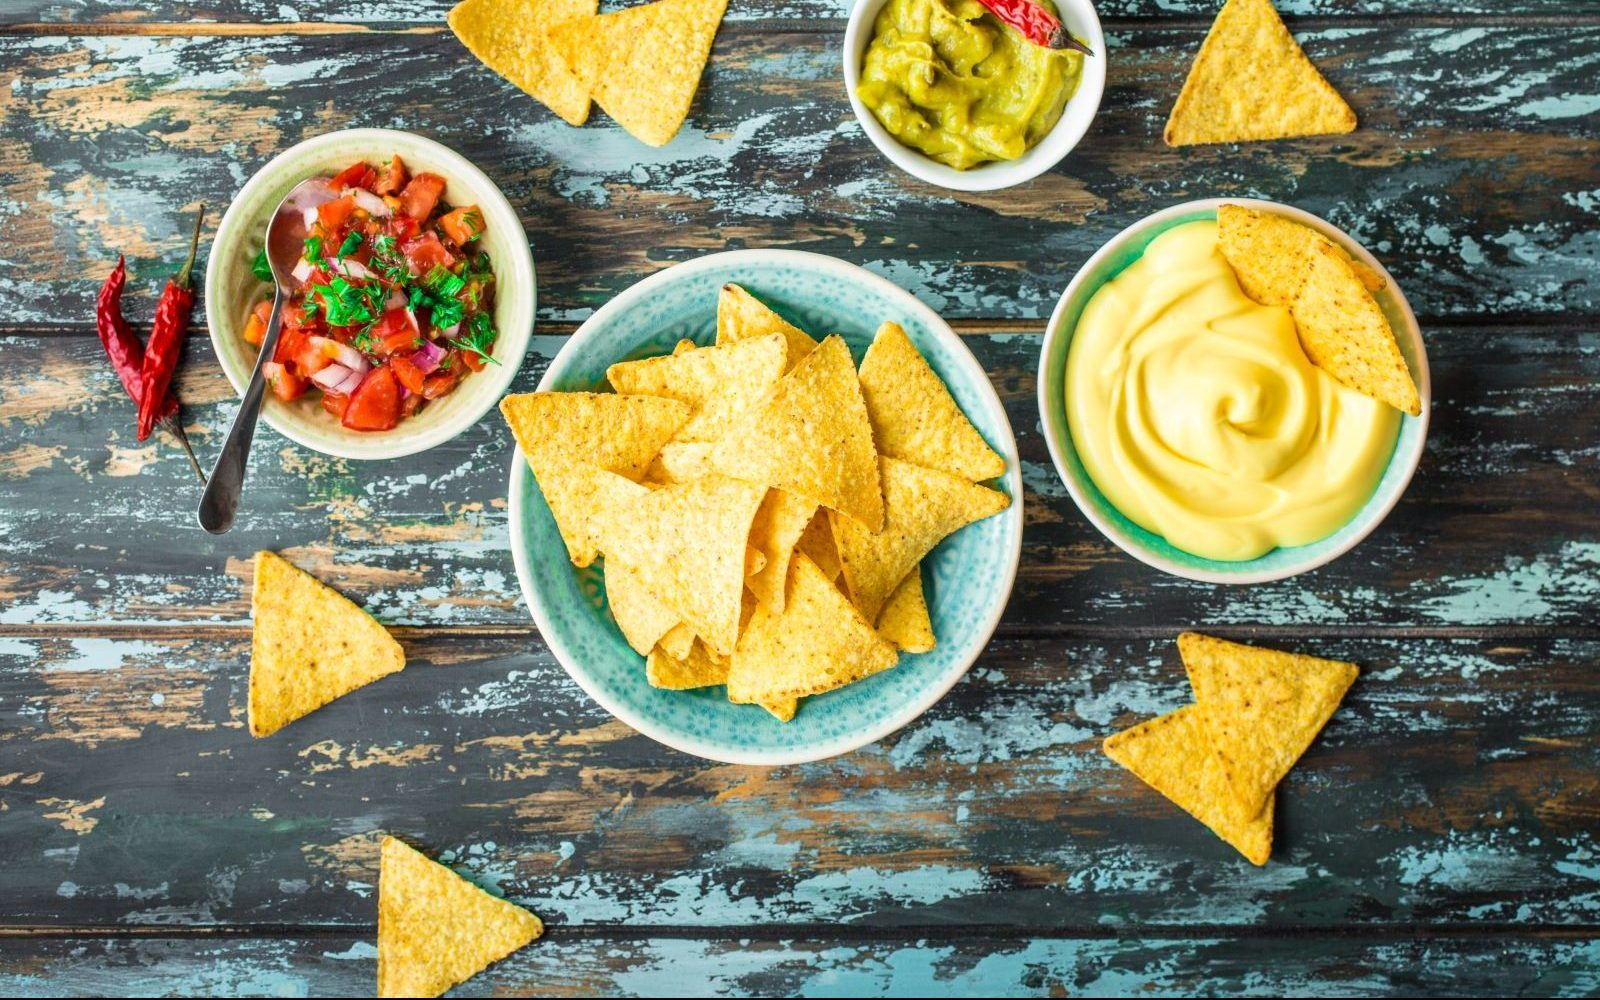 To help you enjoy a guilt-free Cinco de Mayo, we got the scoop on the health benefits of three favorites – salsa, guacamole and queso.